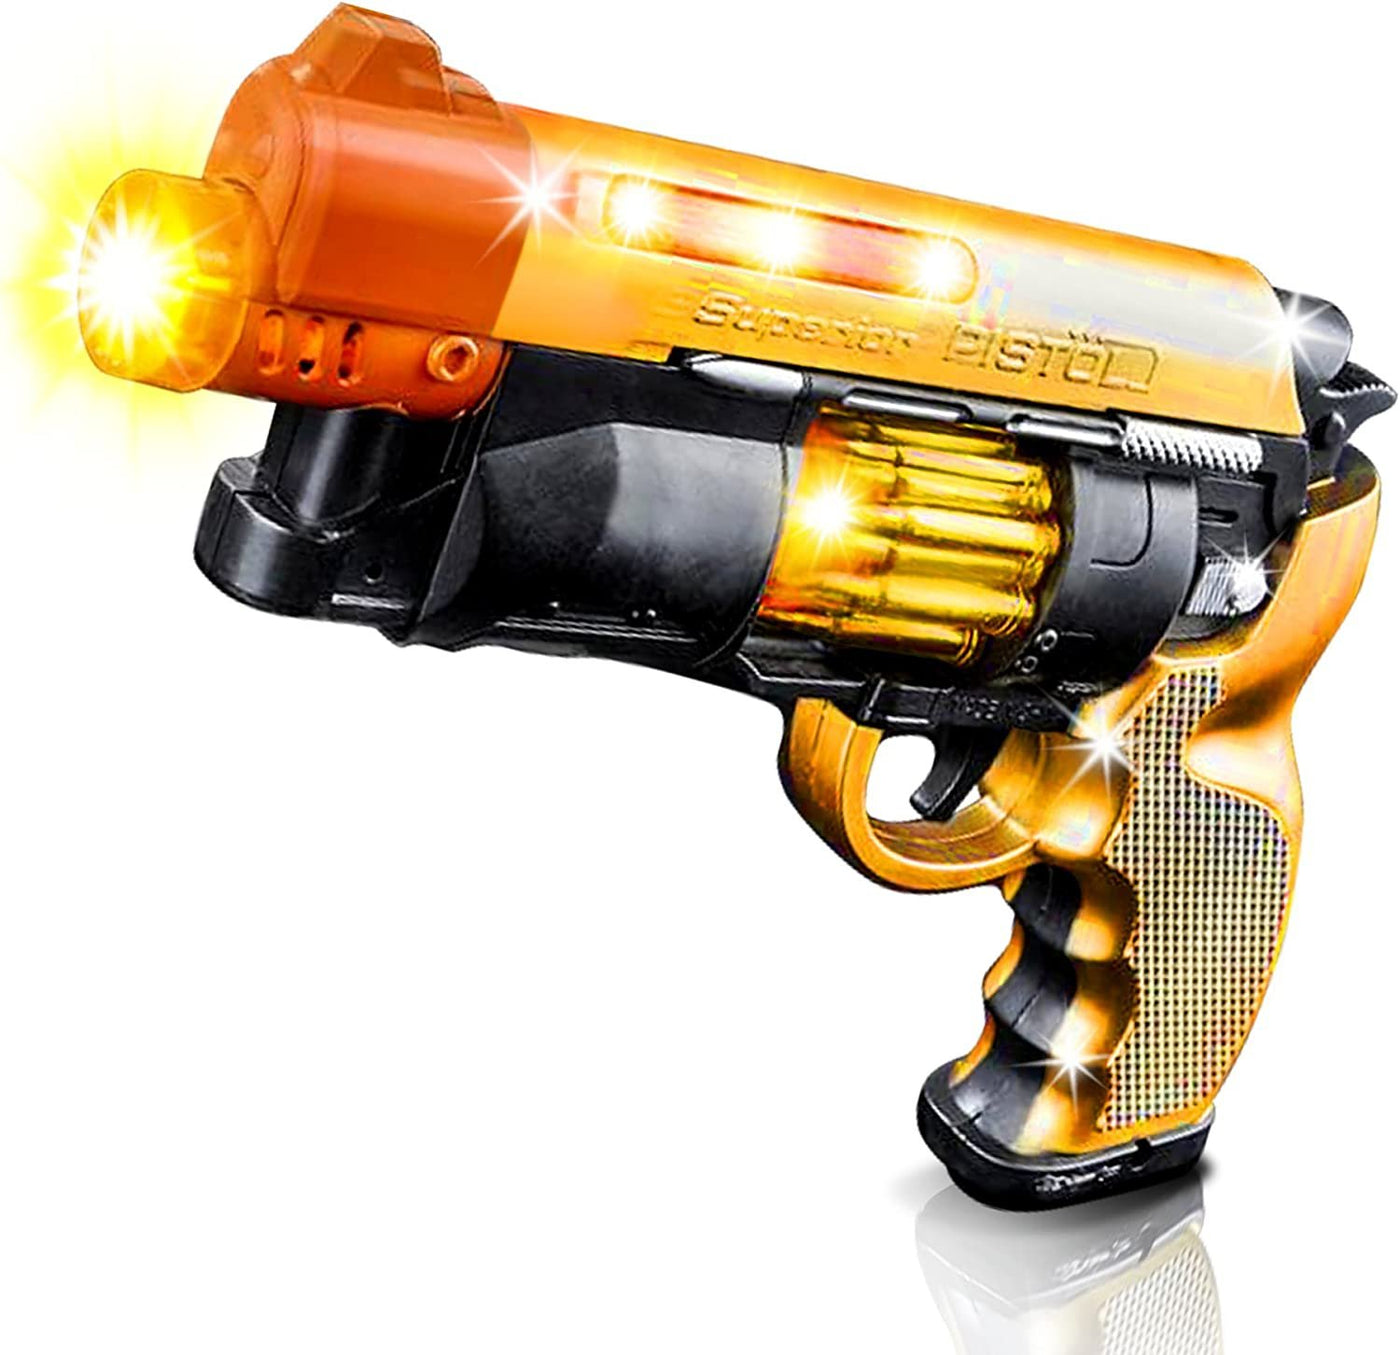 Blade Runner Toy Pistol by Toy Gun for Kids with LED and Sound Effects, Design, Batteries Included, Sturdy Plastic Design, Great Gift Idea for Boys and Girls - 2 Pistols